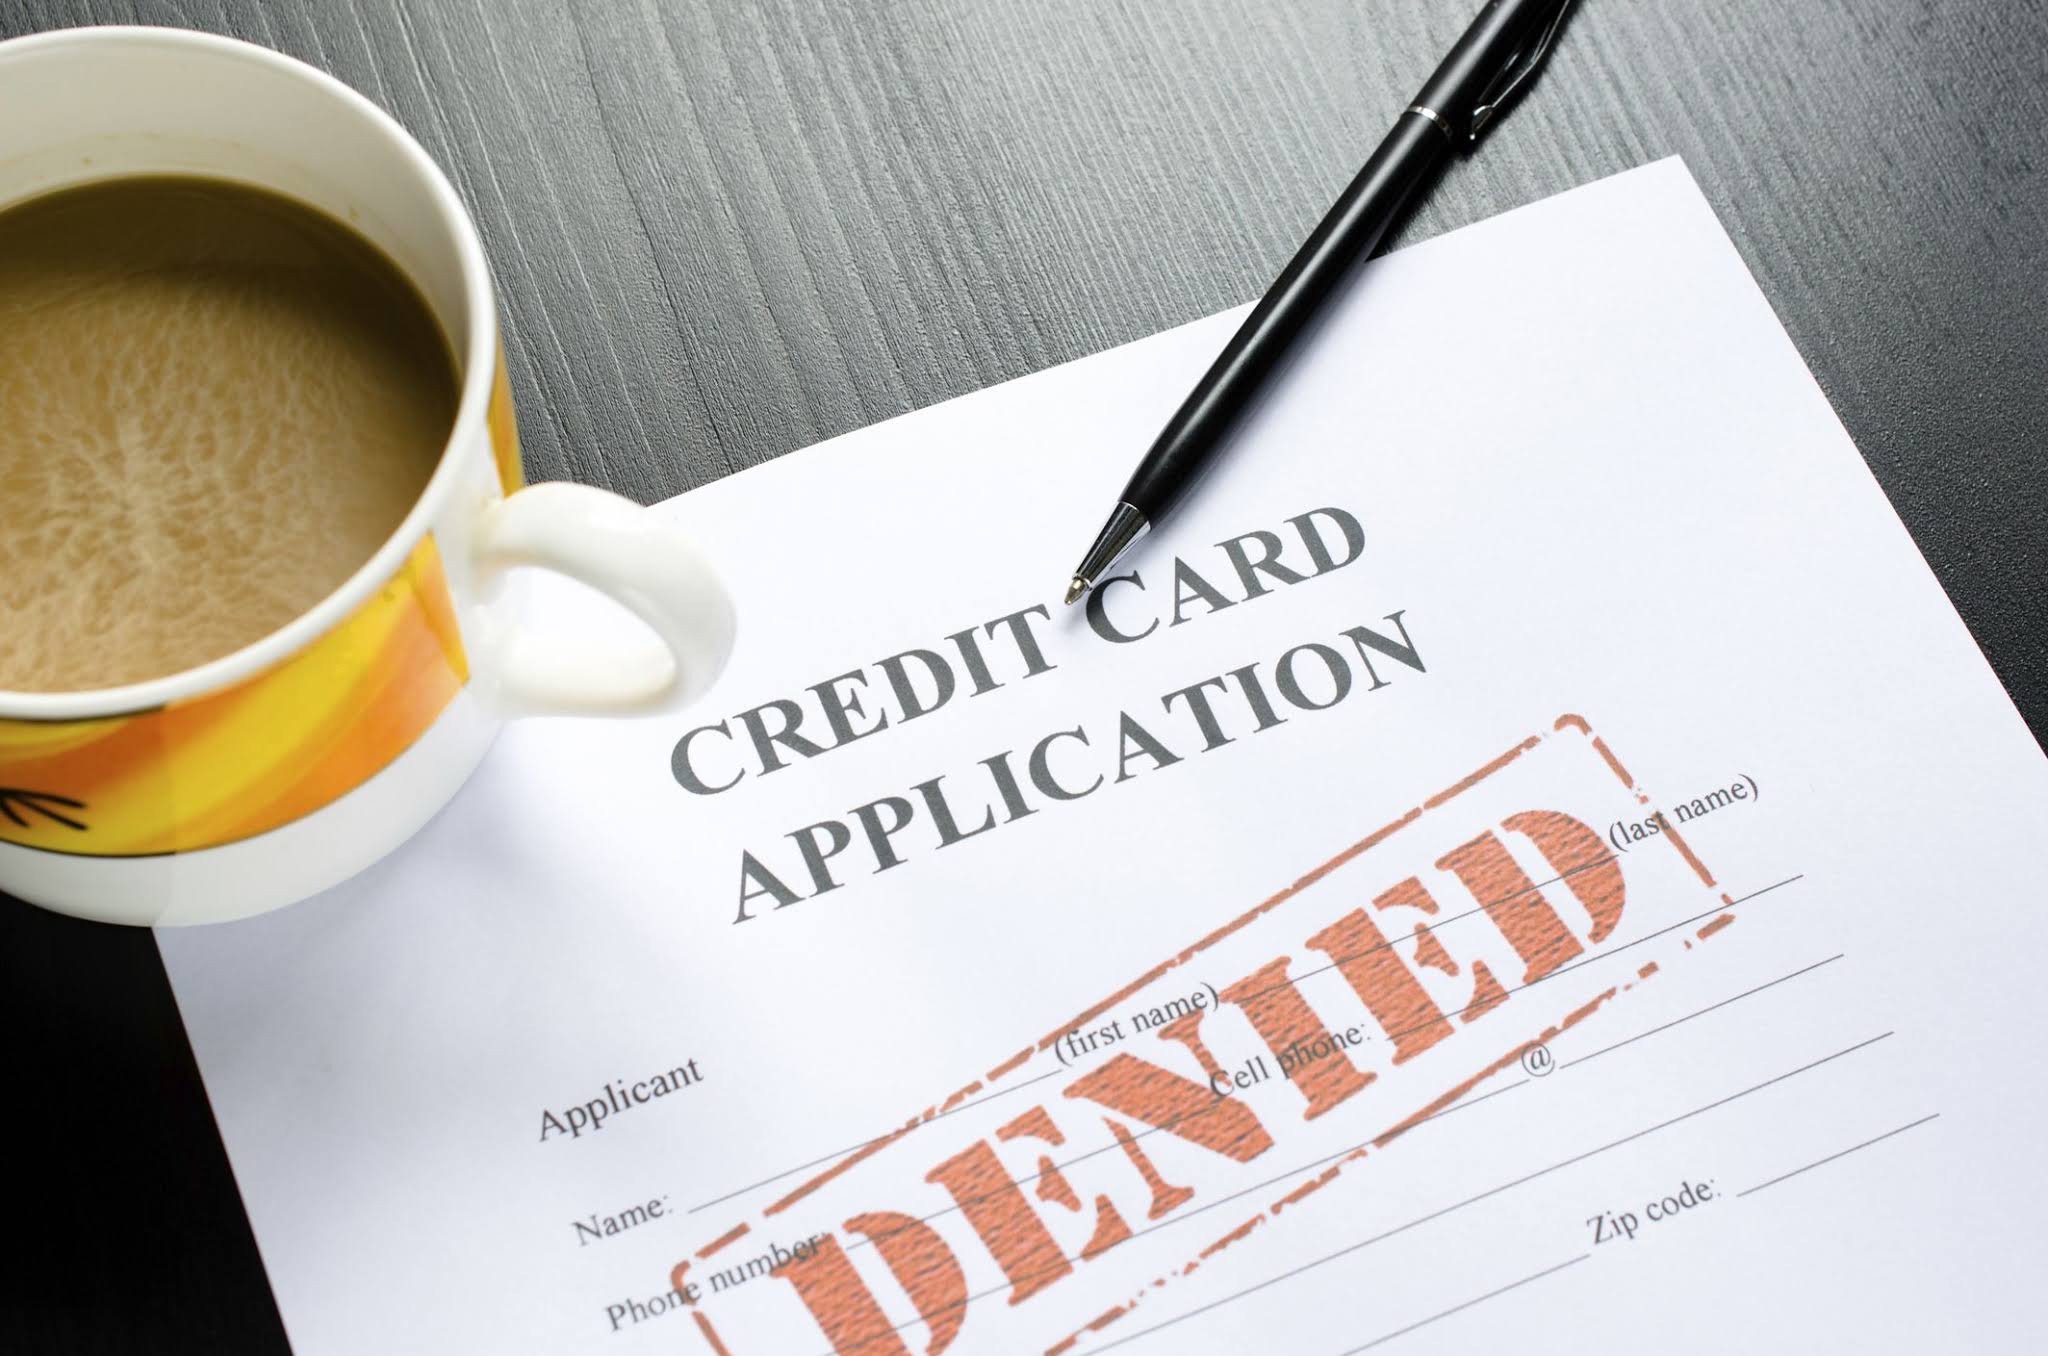 Top 6 Reasons Why Your Credit Card Application Got Rejected